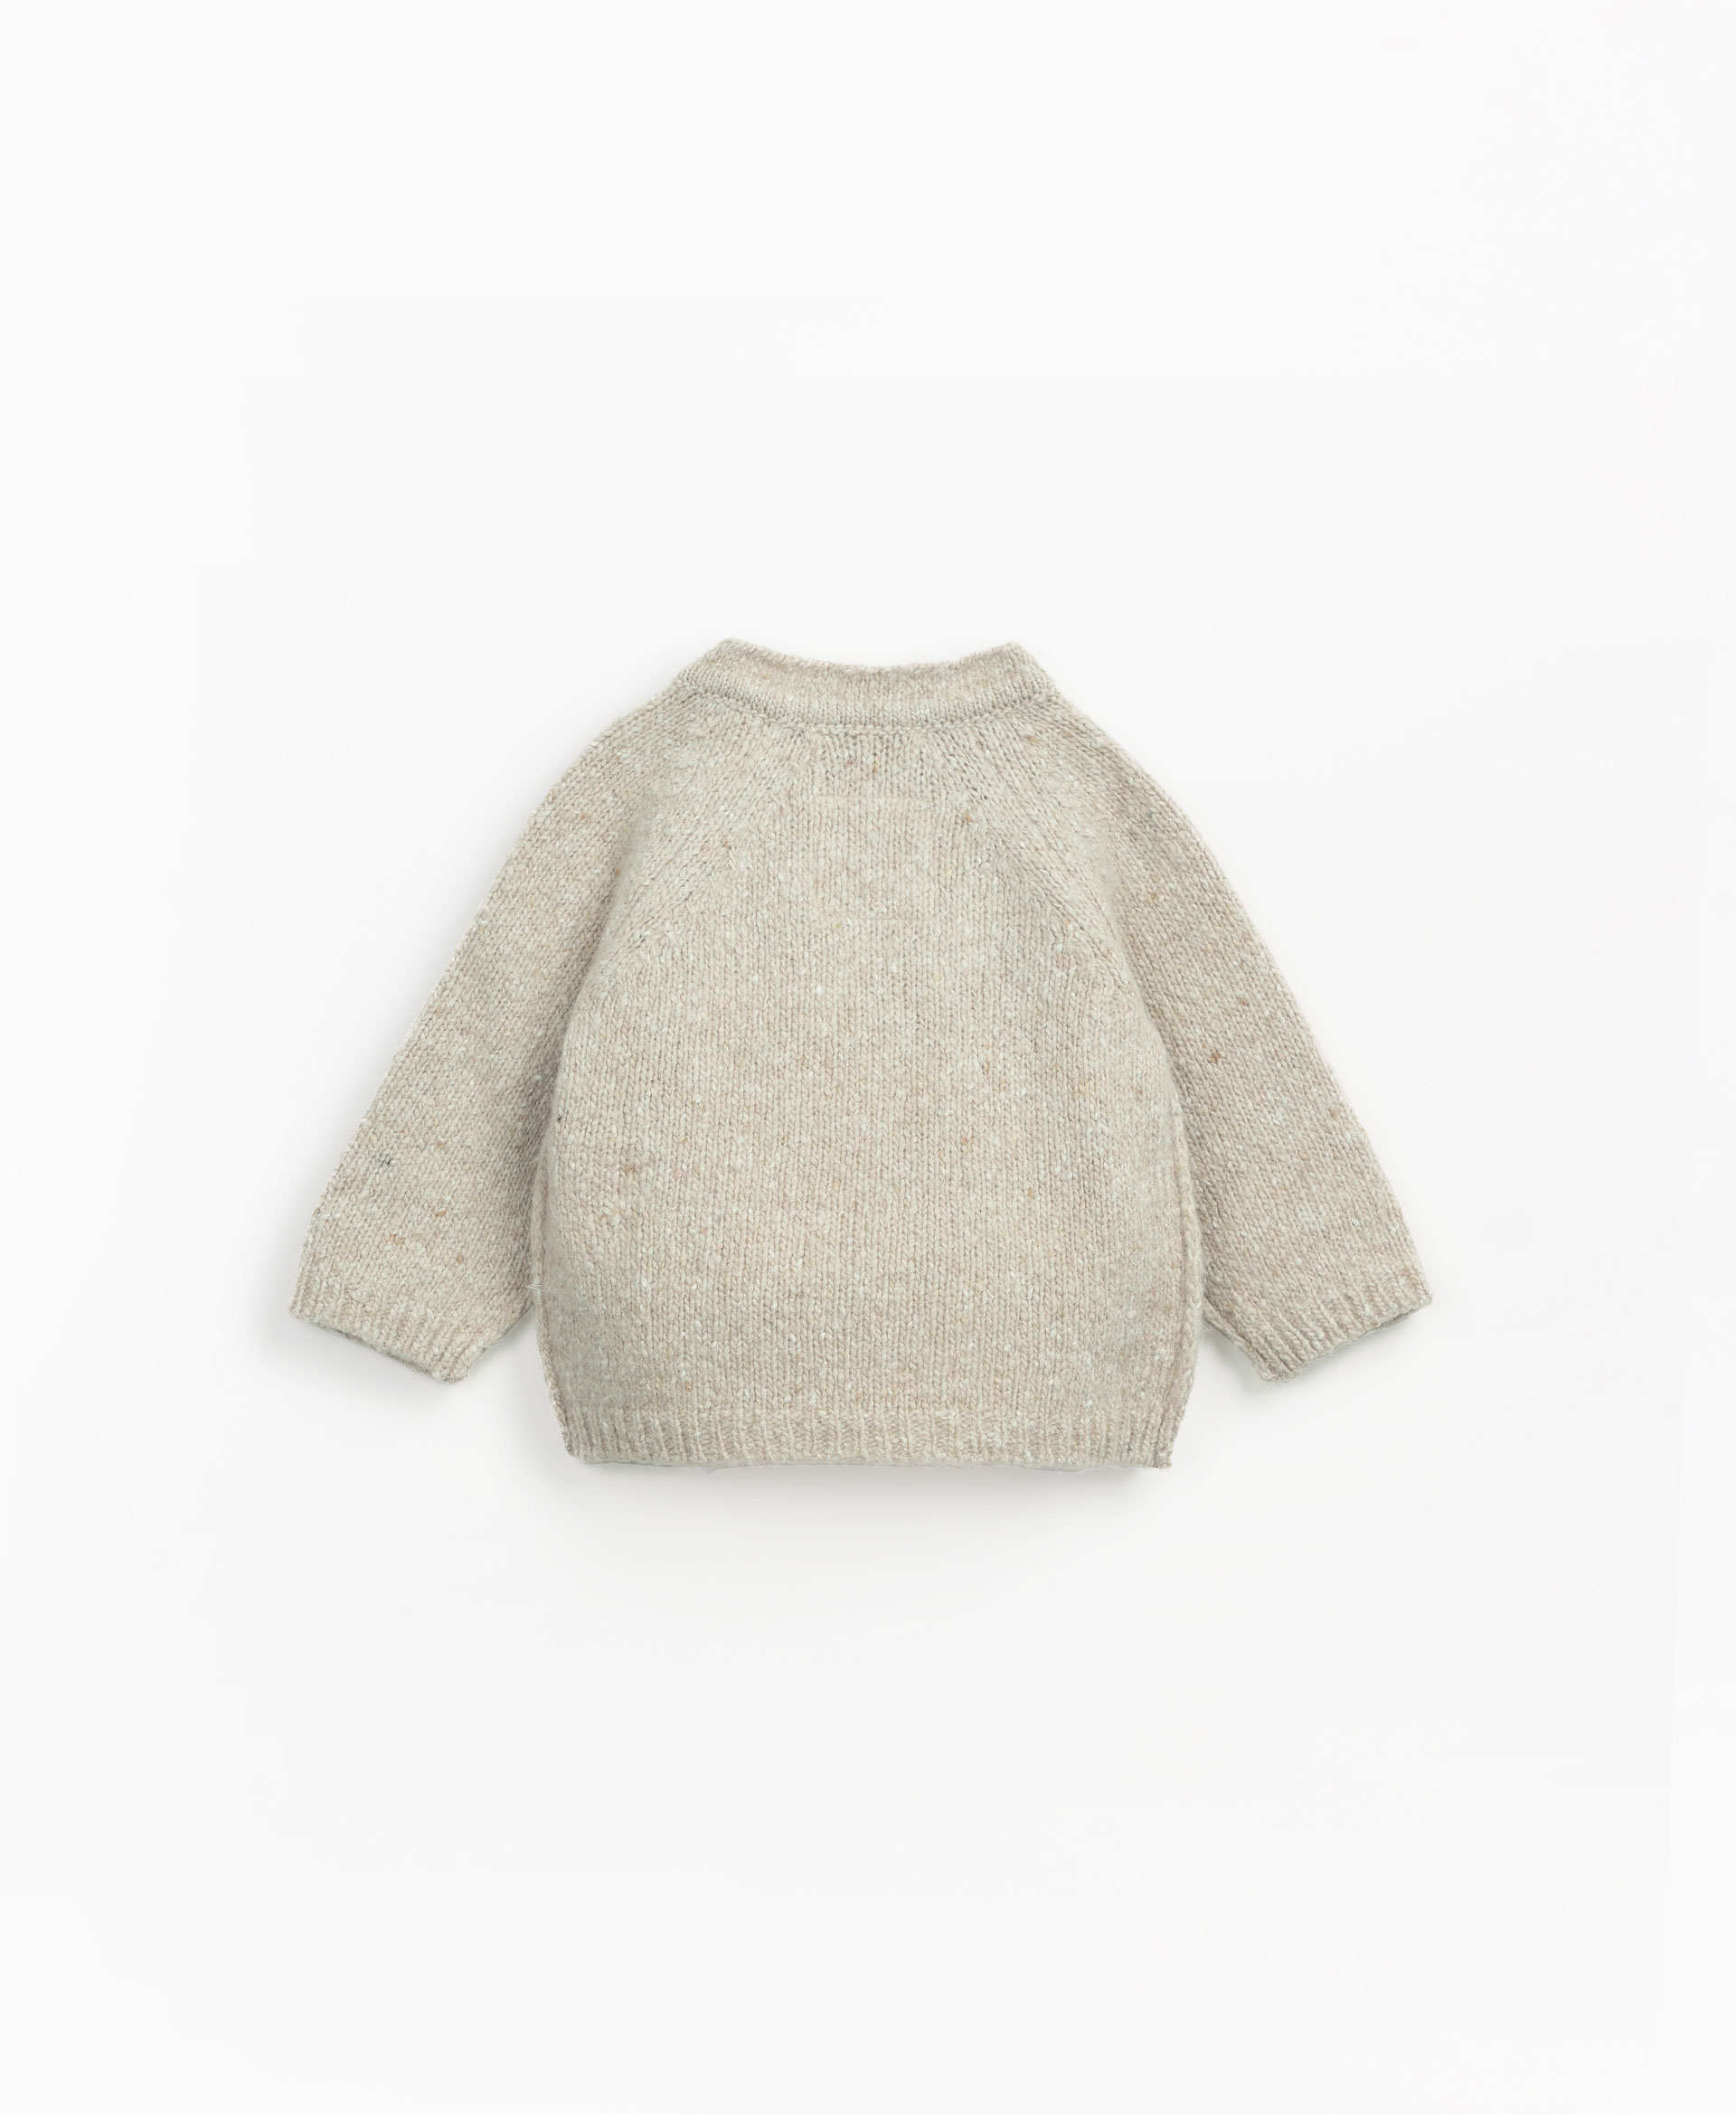 Knitted sweater with opening at the arm hole | Mother Lcia